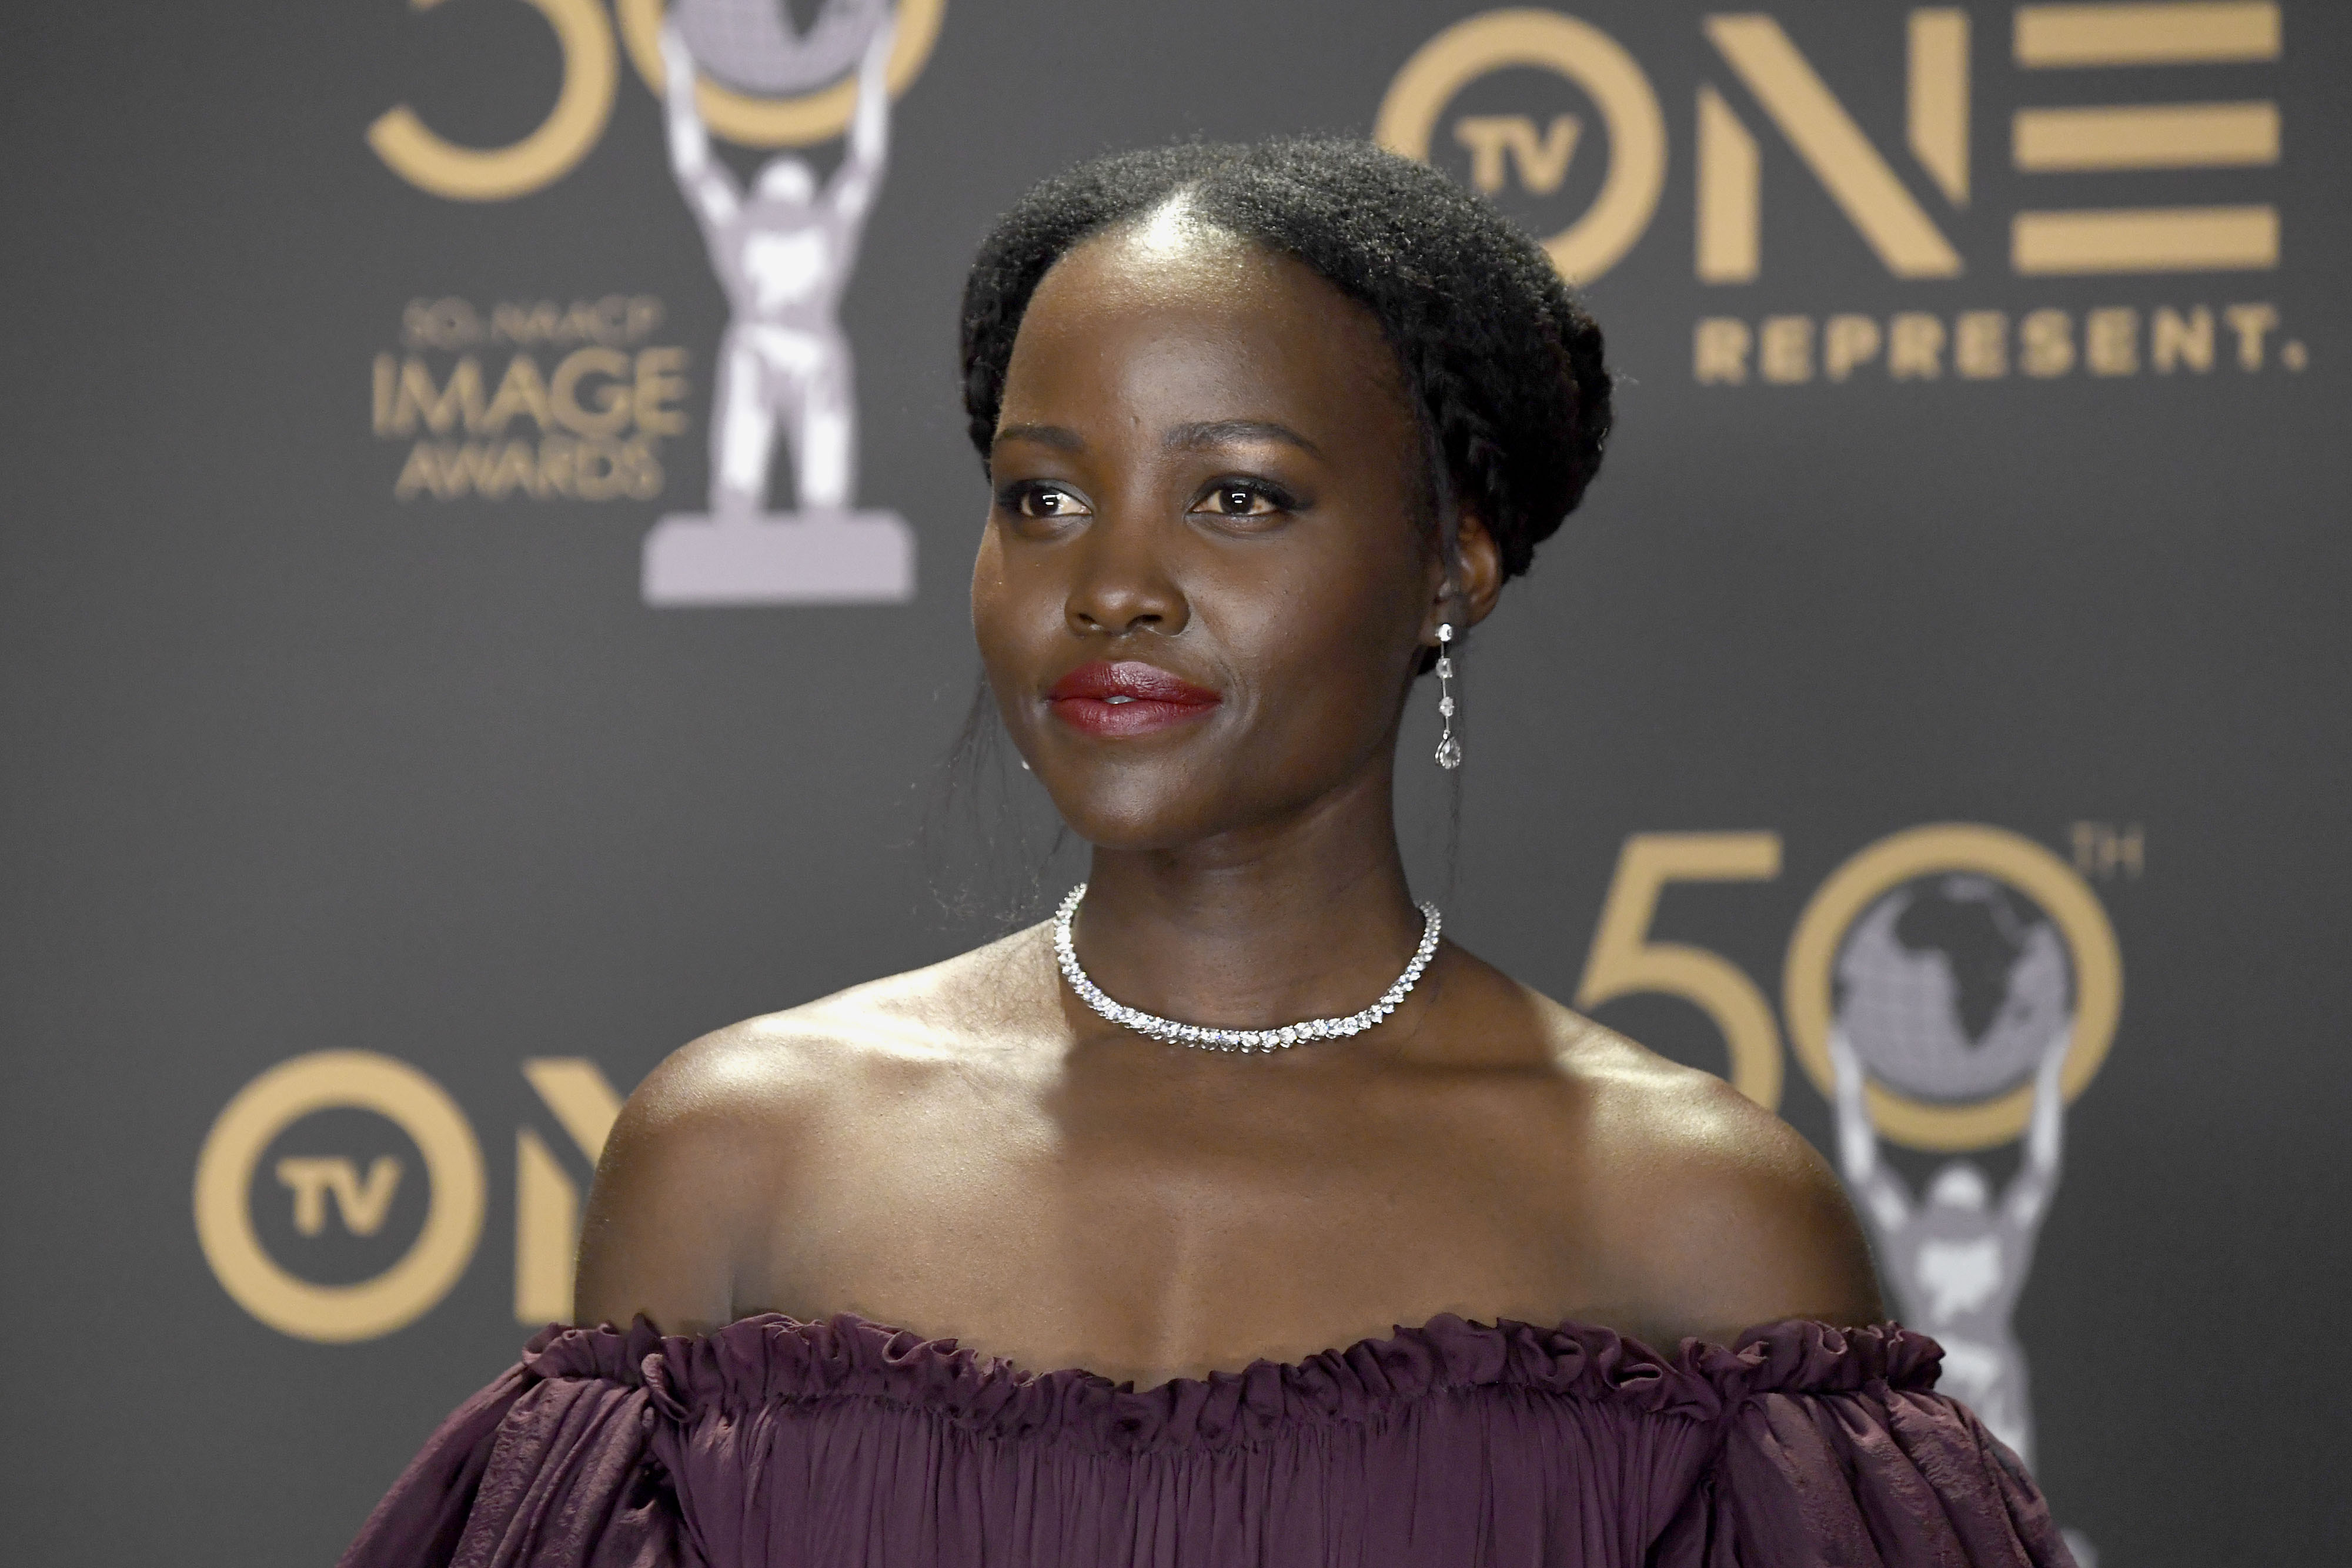 Lupita Nyong’o Compares “Game Of Thrones” White Walkers To “Us” Tethered